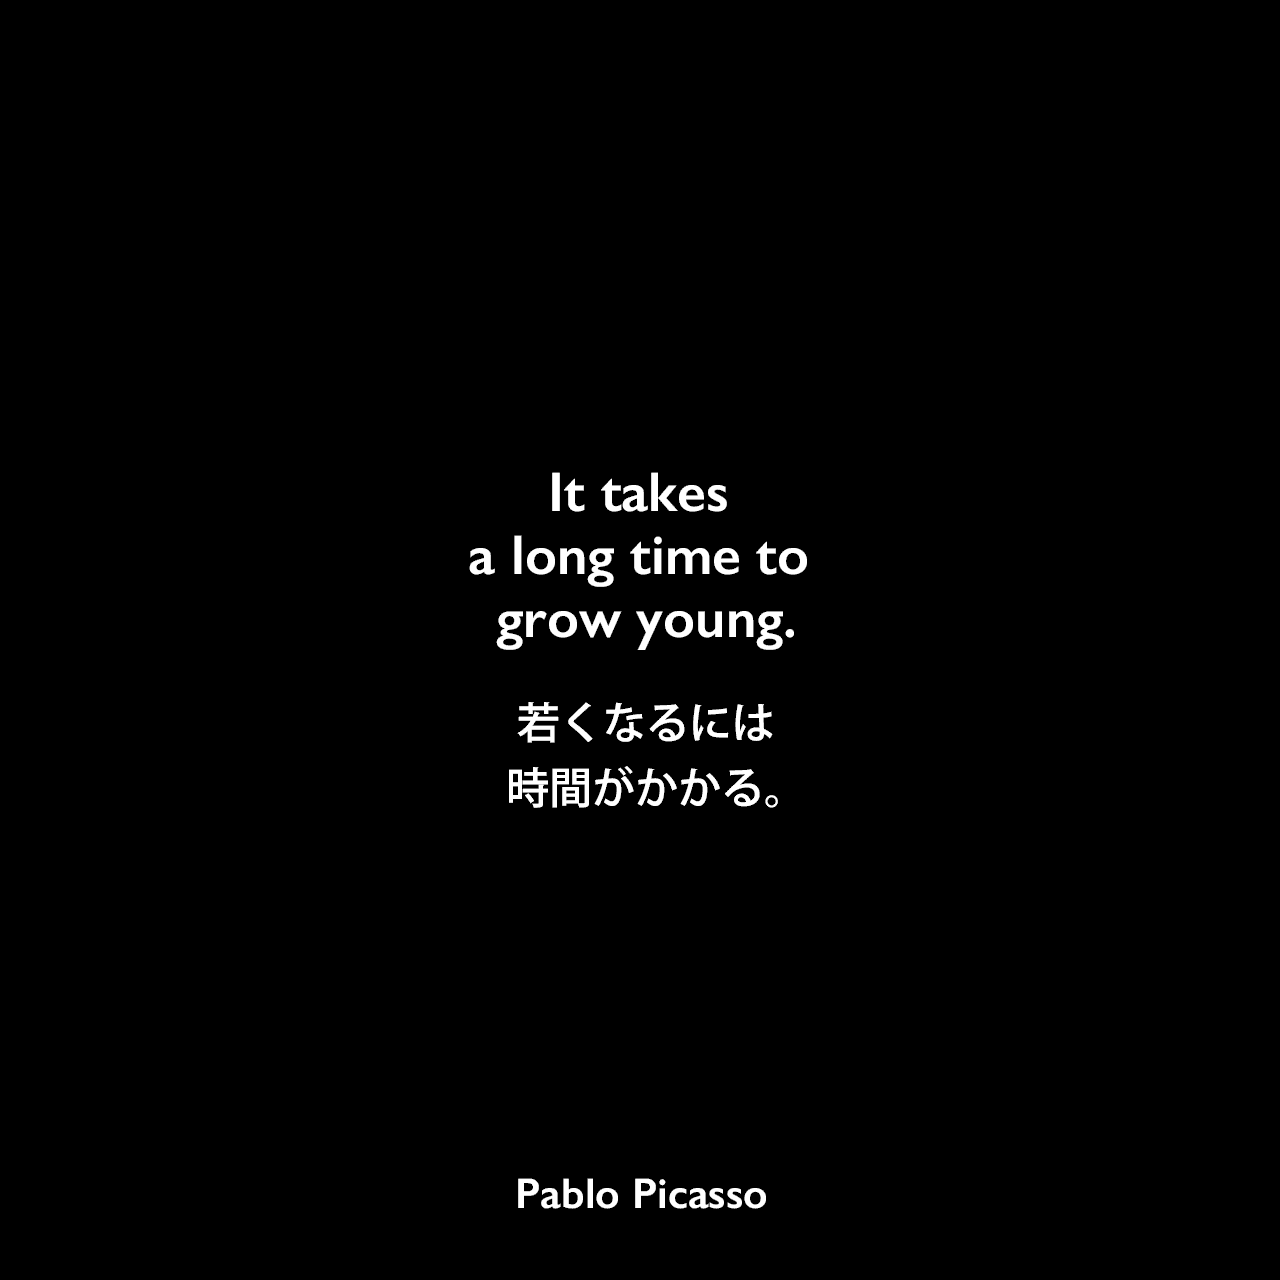 It takes a long time to grow young.若くなるには、時間がかかる。Pablo Picasso